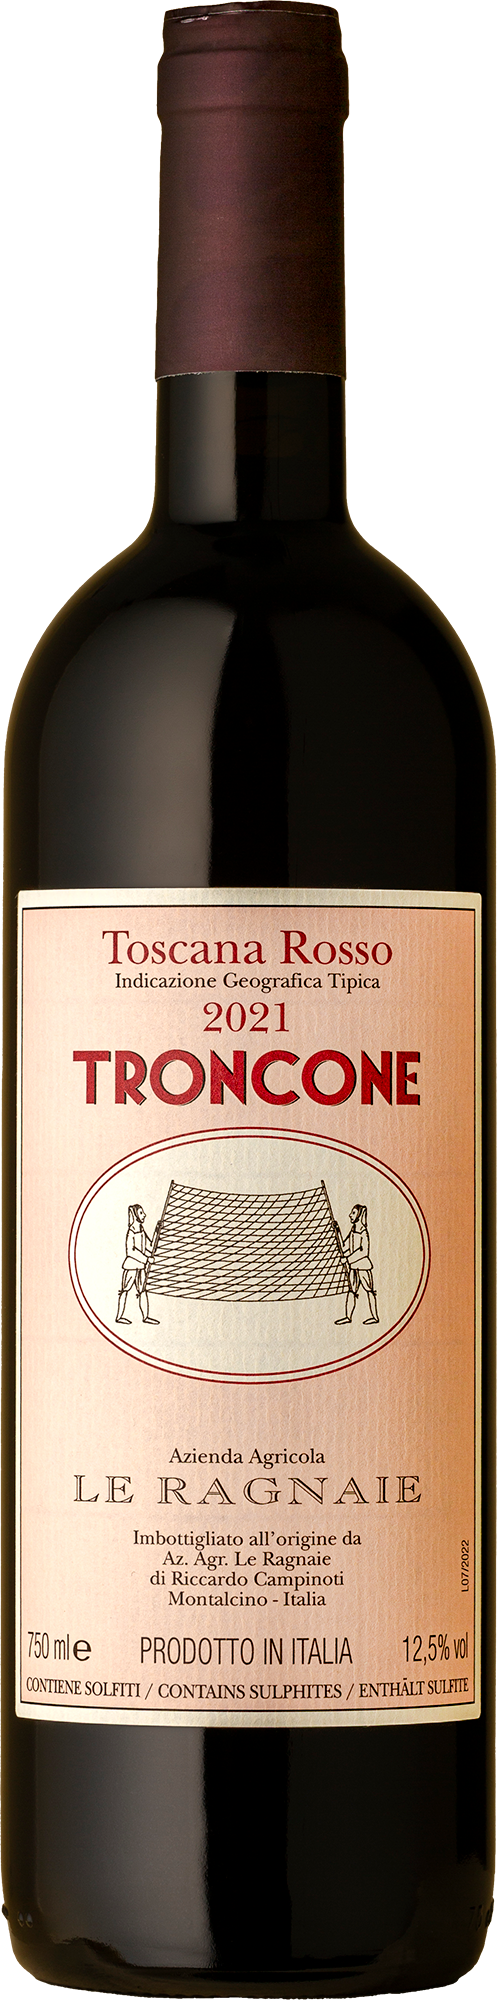 Le Ragnaie - Troncone Sangiovese 2021 Red Wine